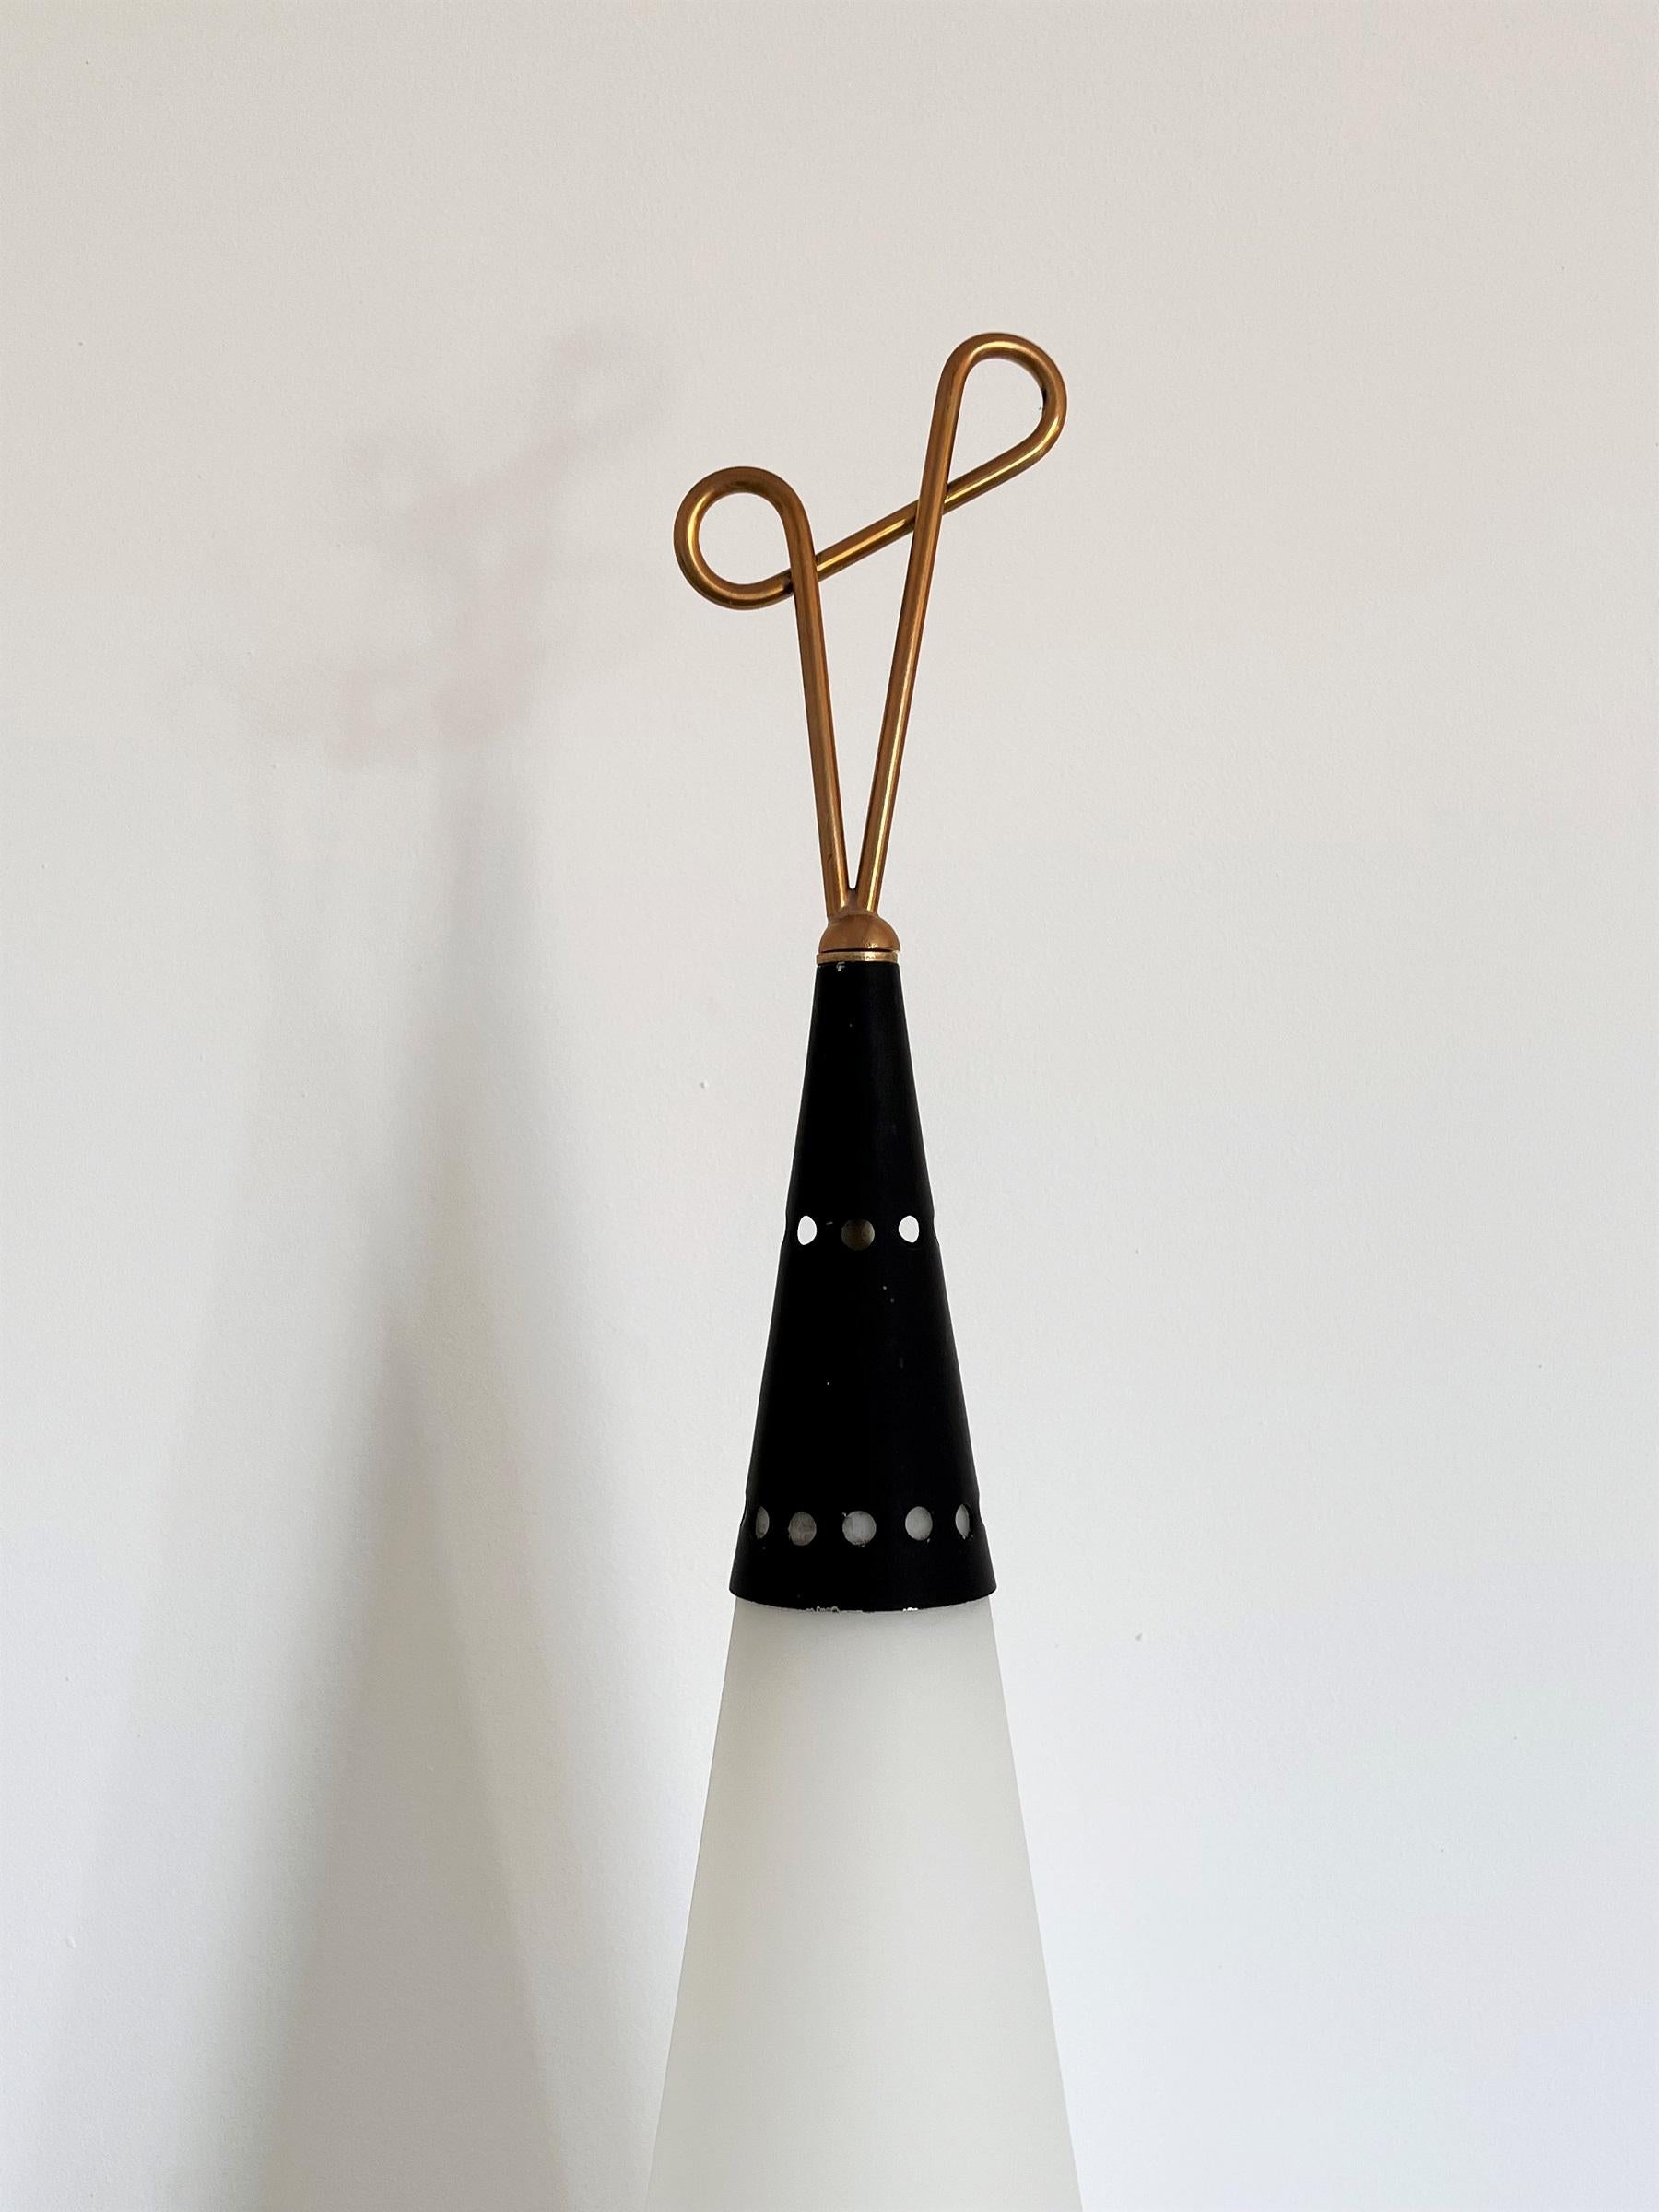 Mid-20th Century Italian Midcentury Floor Lamp in Glass, Brass and Marble by Reggiani, 1960s For Sale